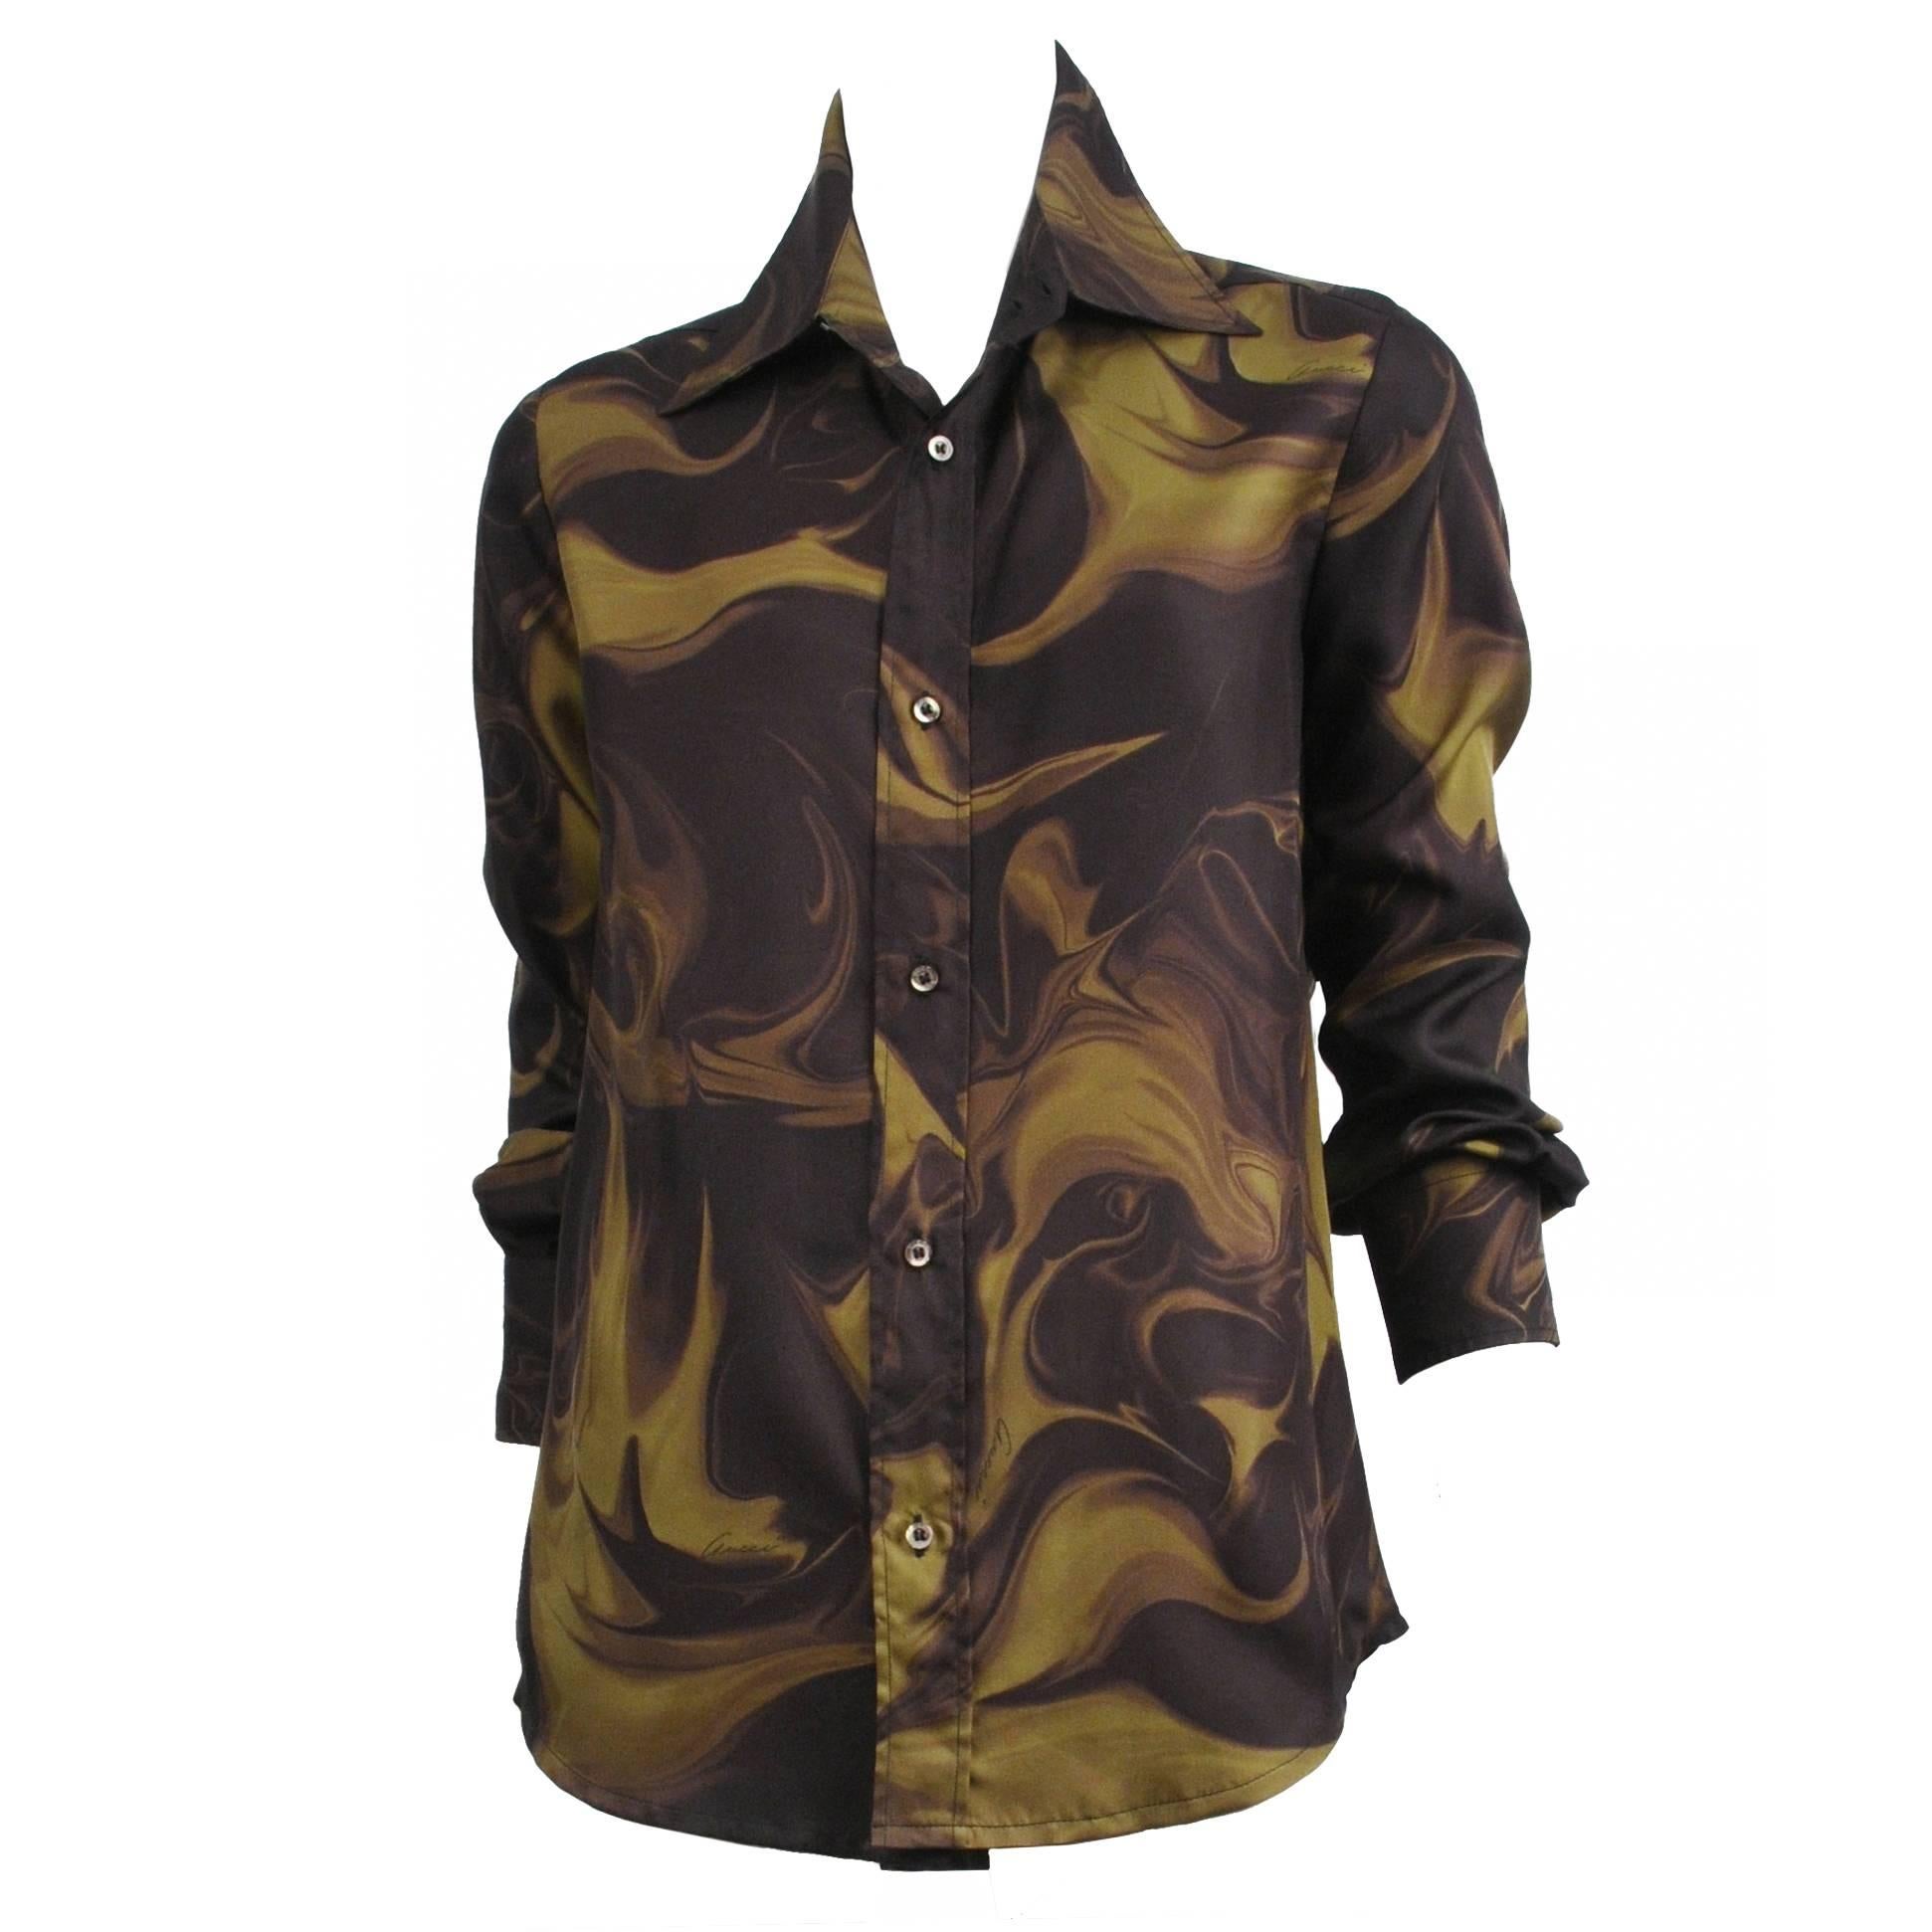 Tom Ford for Gucci Marble Print Silk Shirt